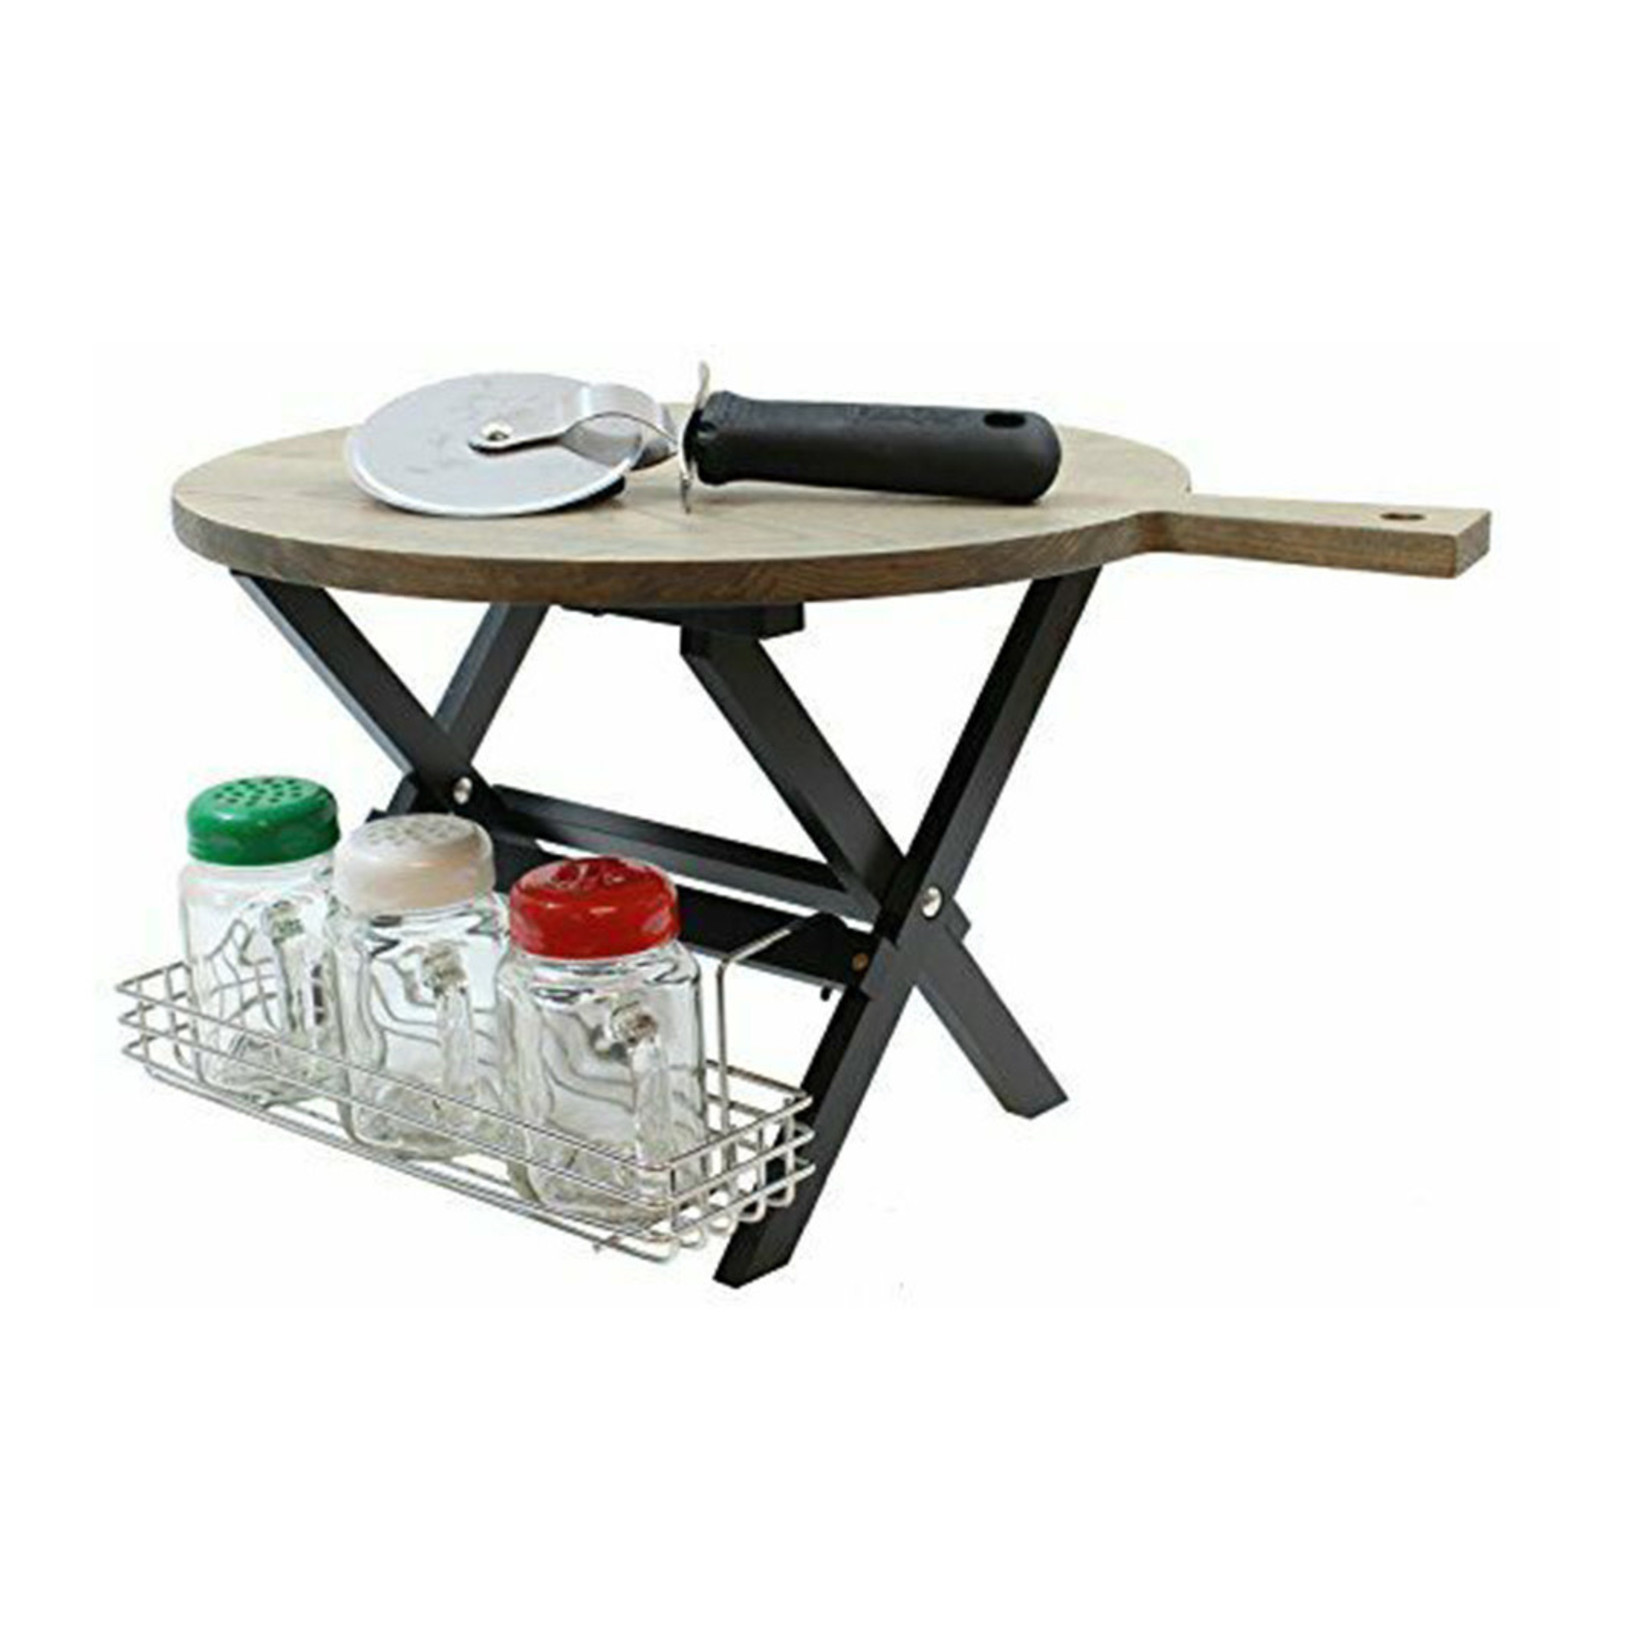 Pizza Kit, Includes: The 8oz (3) Tray Mason Paddle Frog & Pizza Round Ashwood Fancy - Jars, Cutter Stand, Rack, Boutique Mini